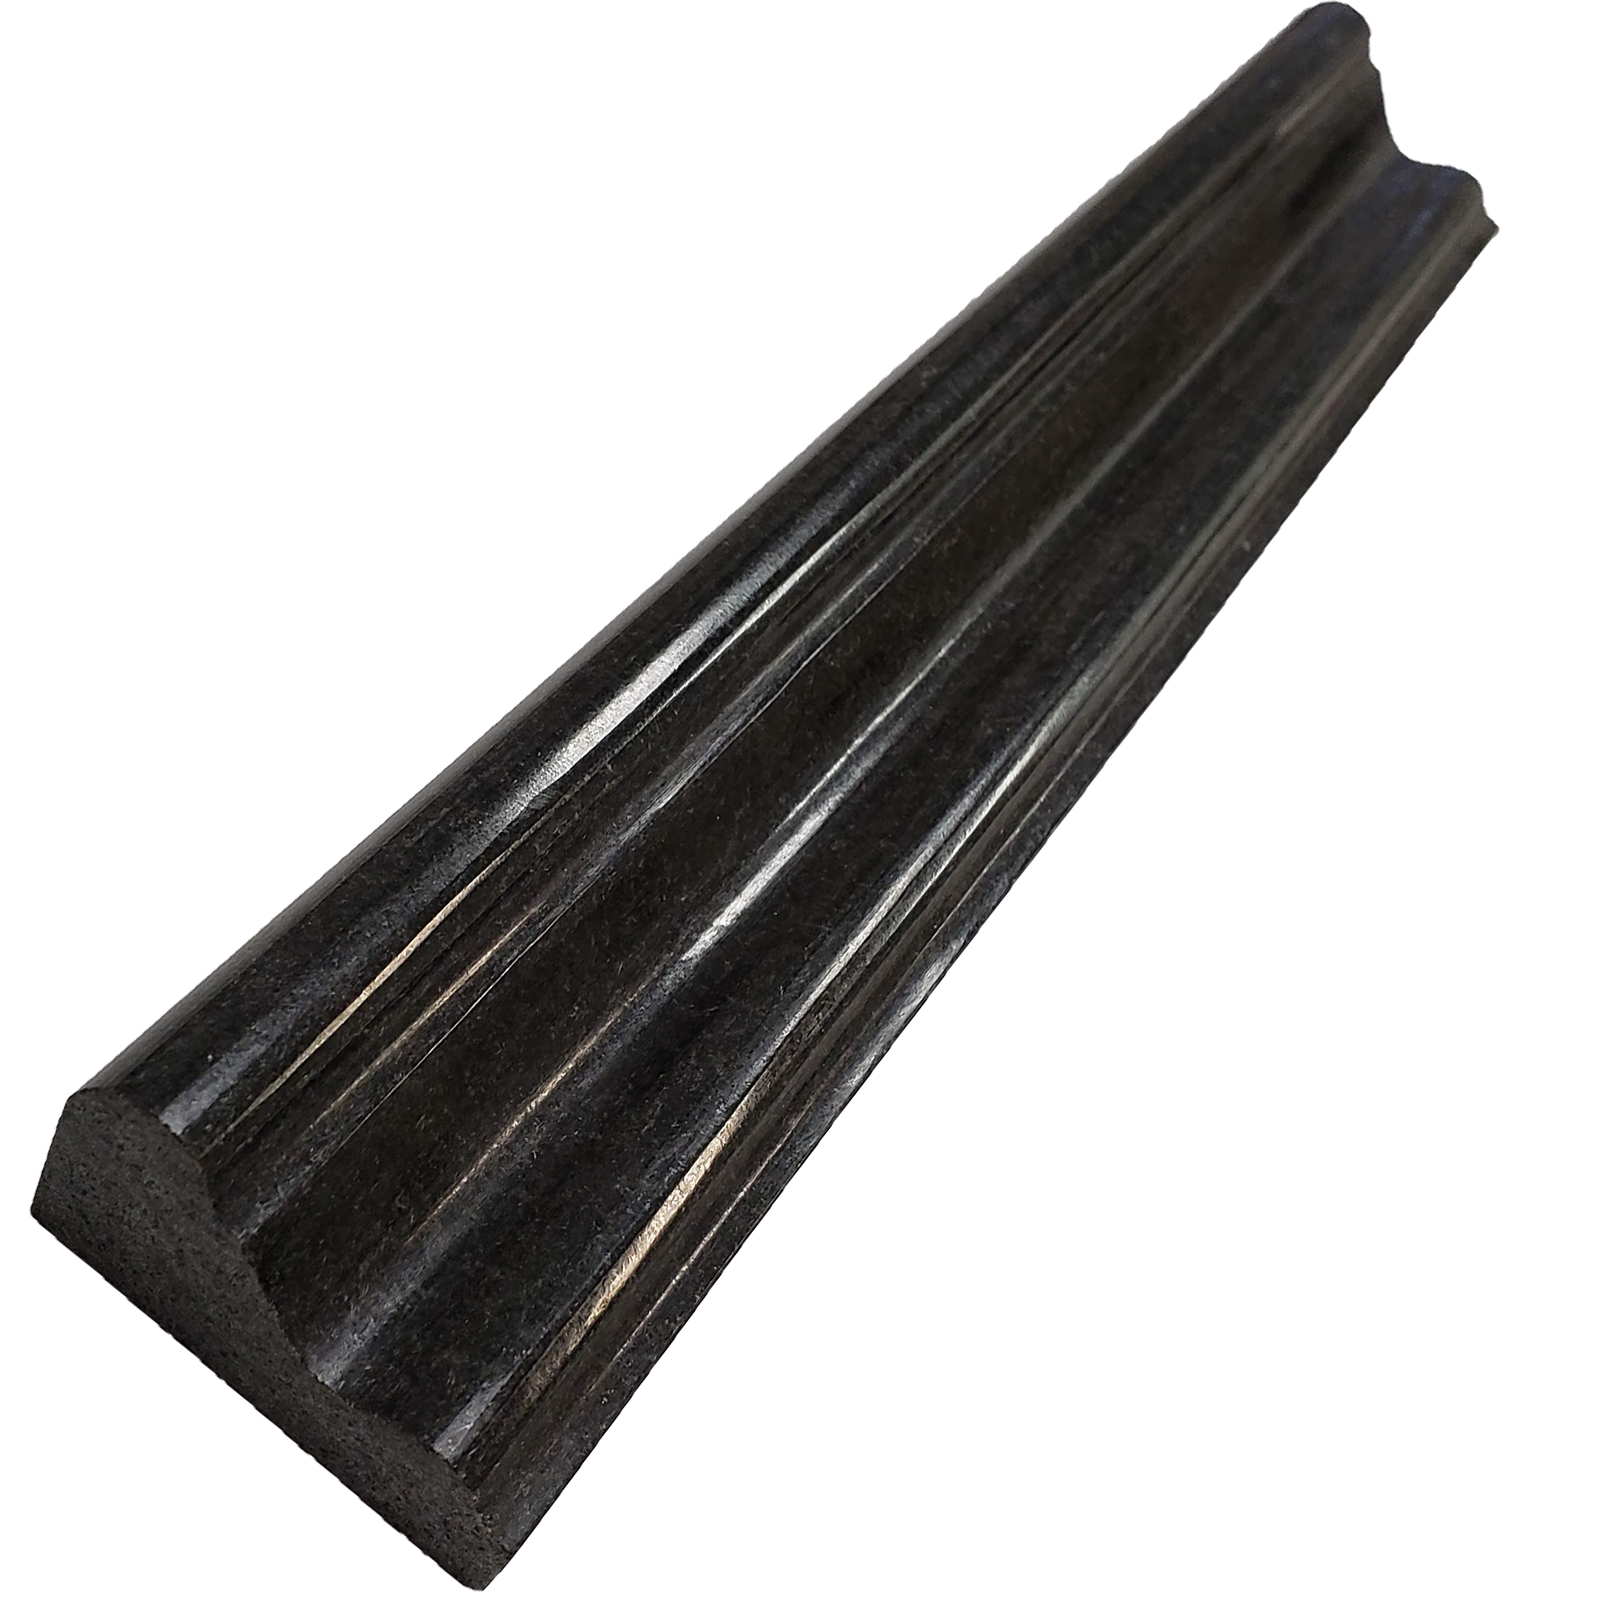 Crown Molding Absolute Black Granite Polished 